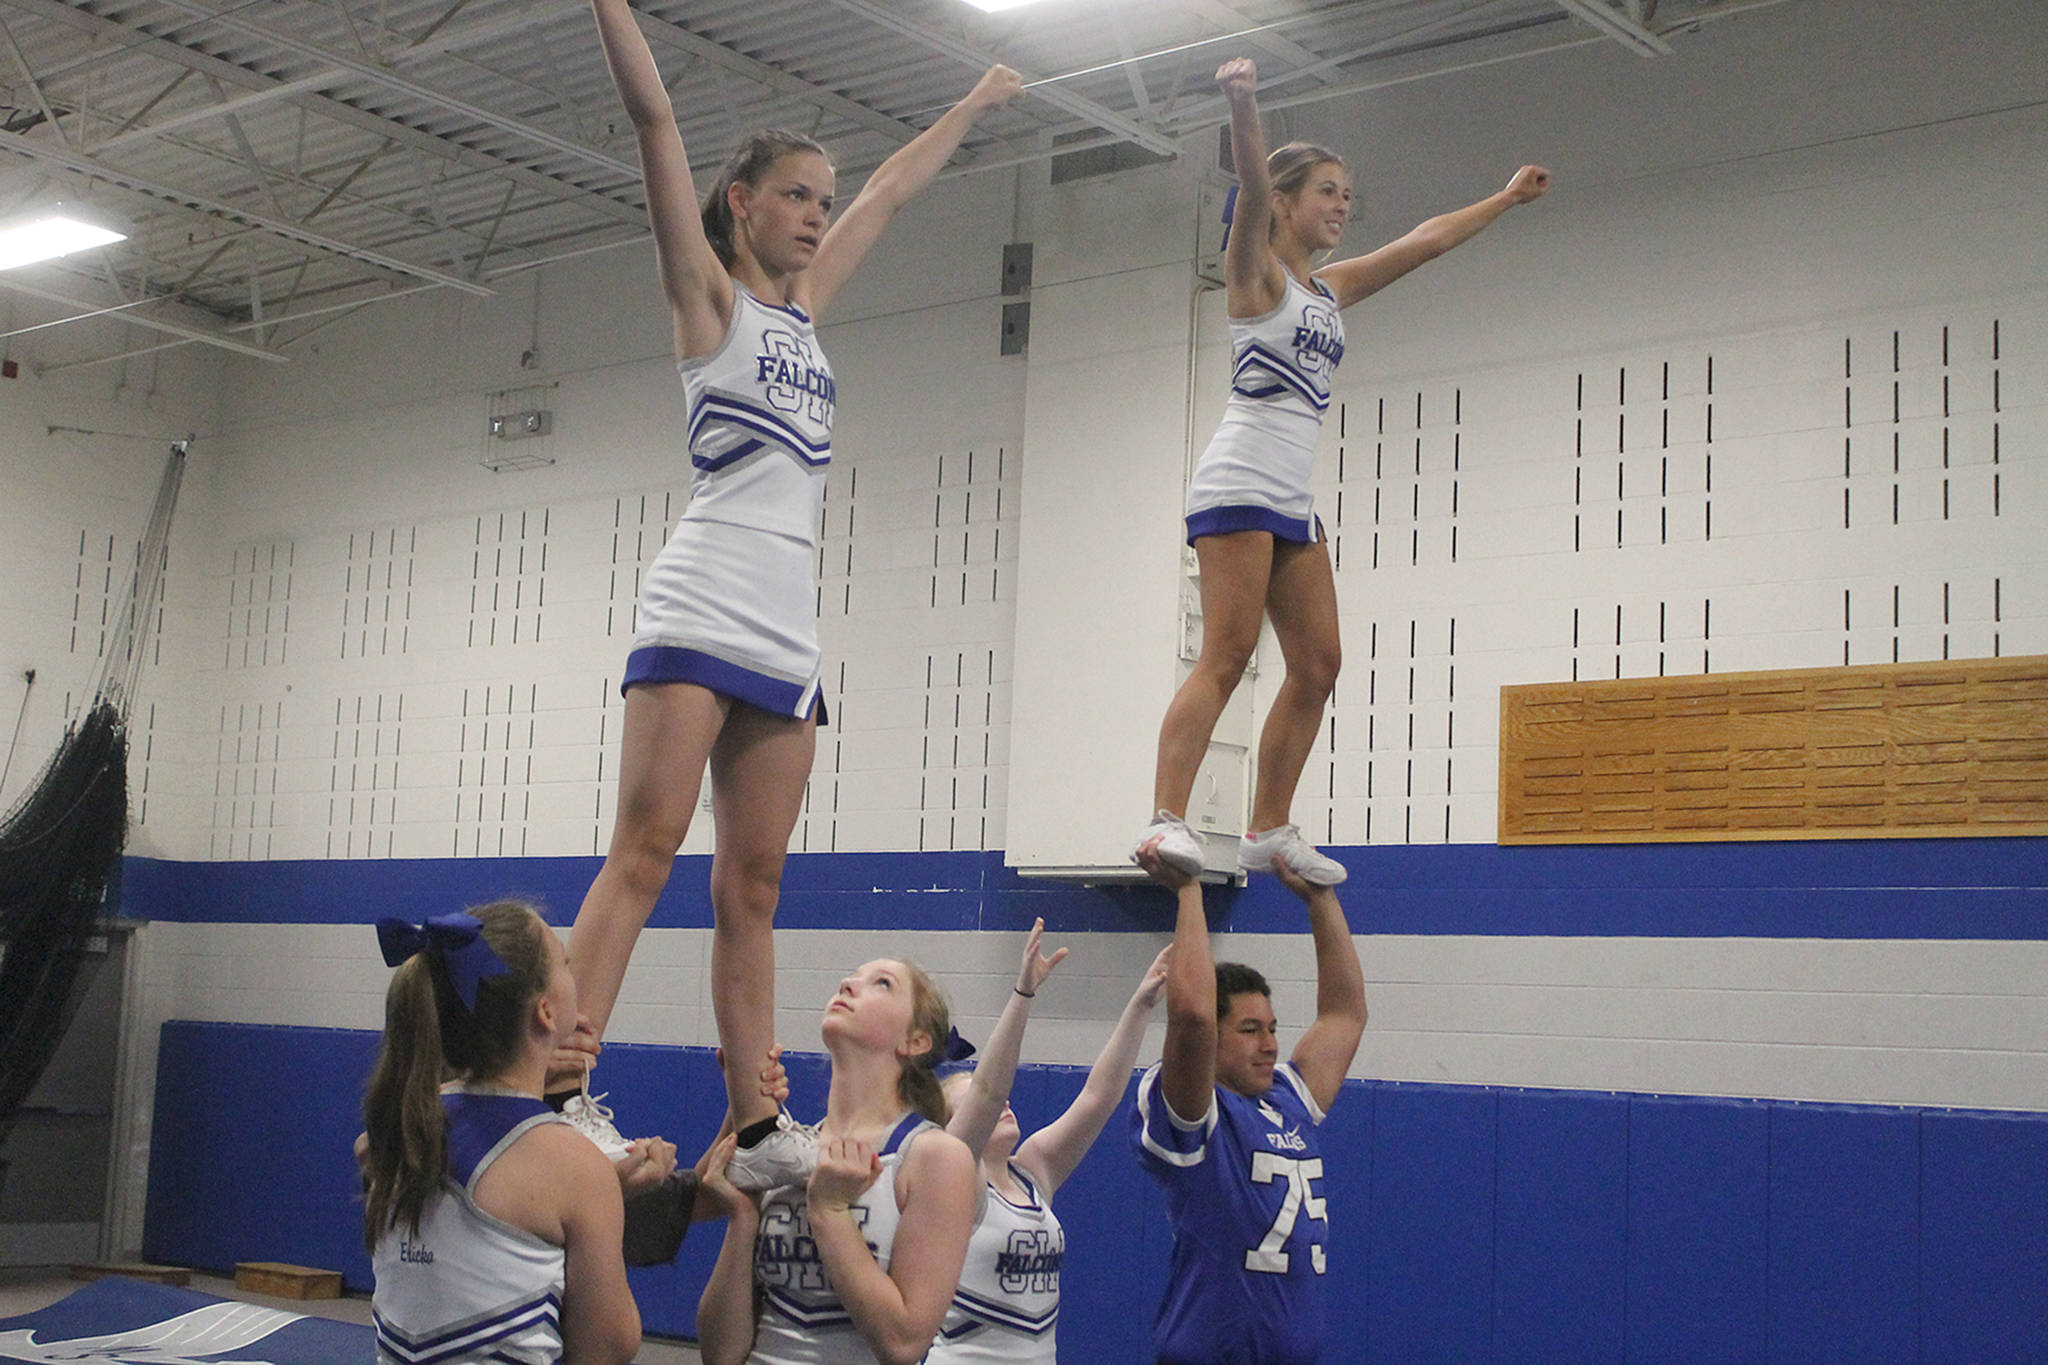 Cheer team wins camp competition, preps for fall season